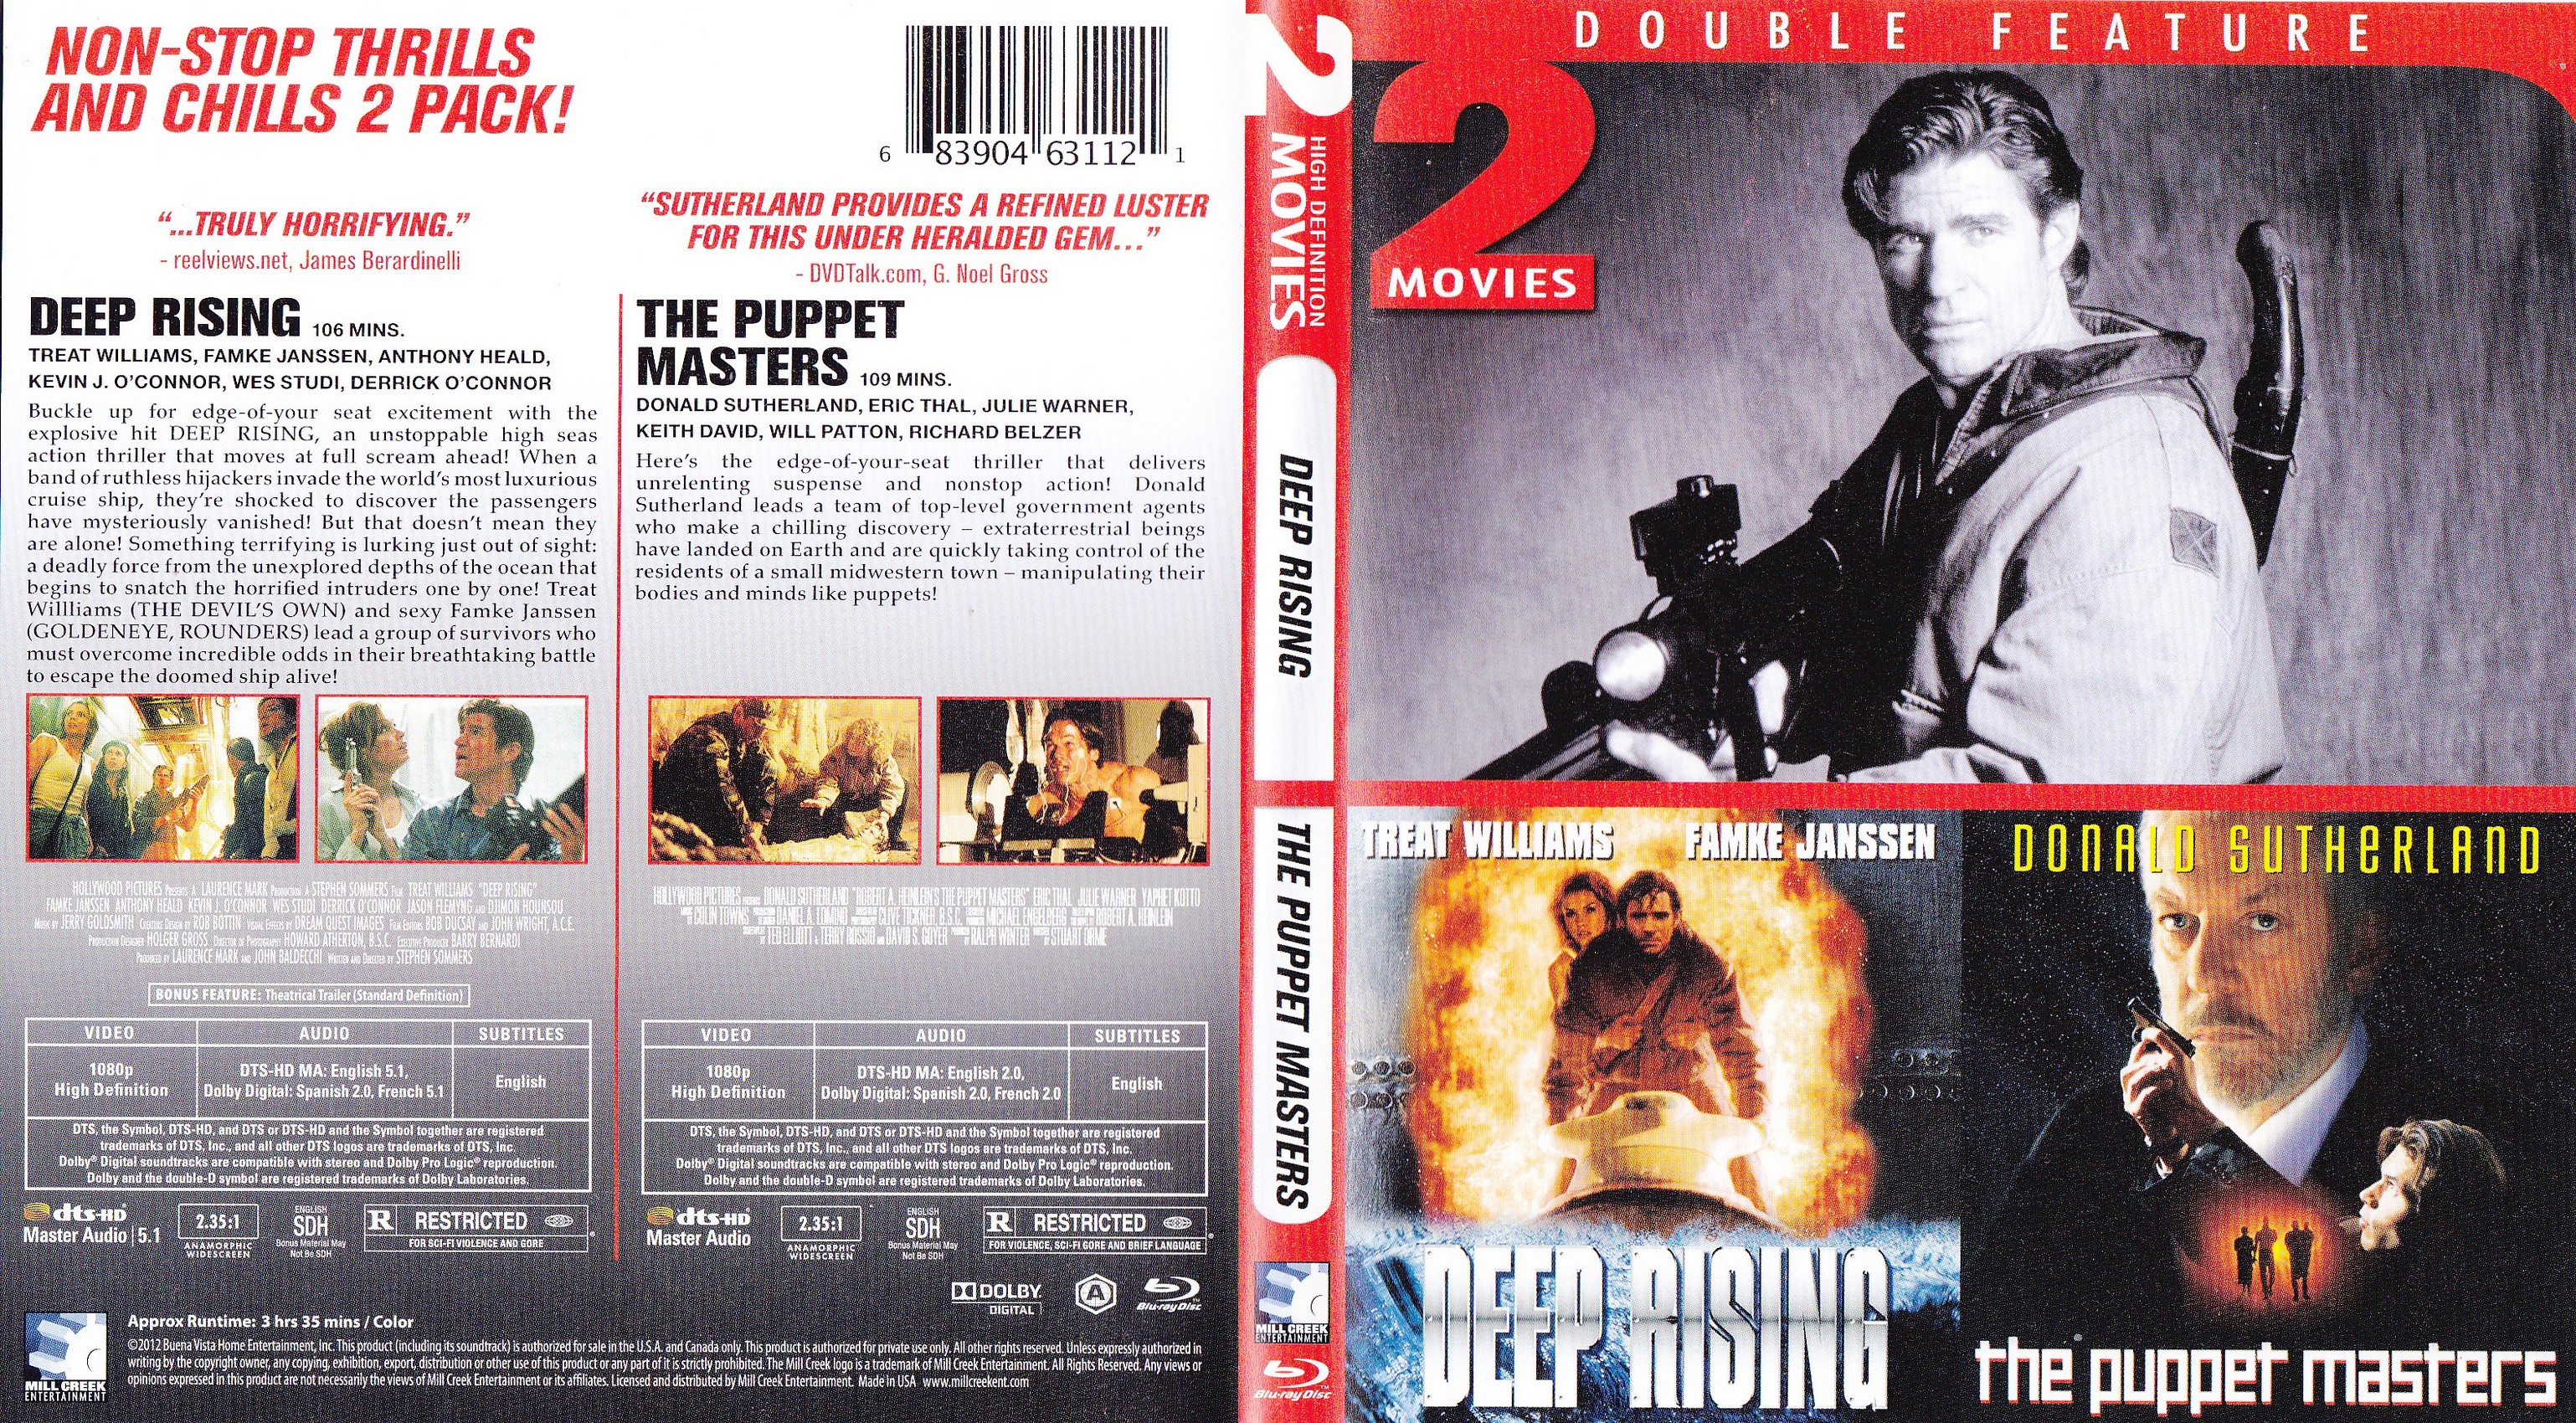 Jaquette DVD Deep rising + The puppet masters Zone 1 (BLU-RAY)